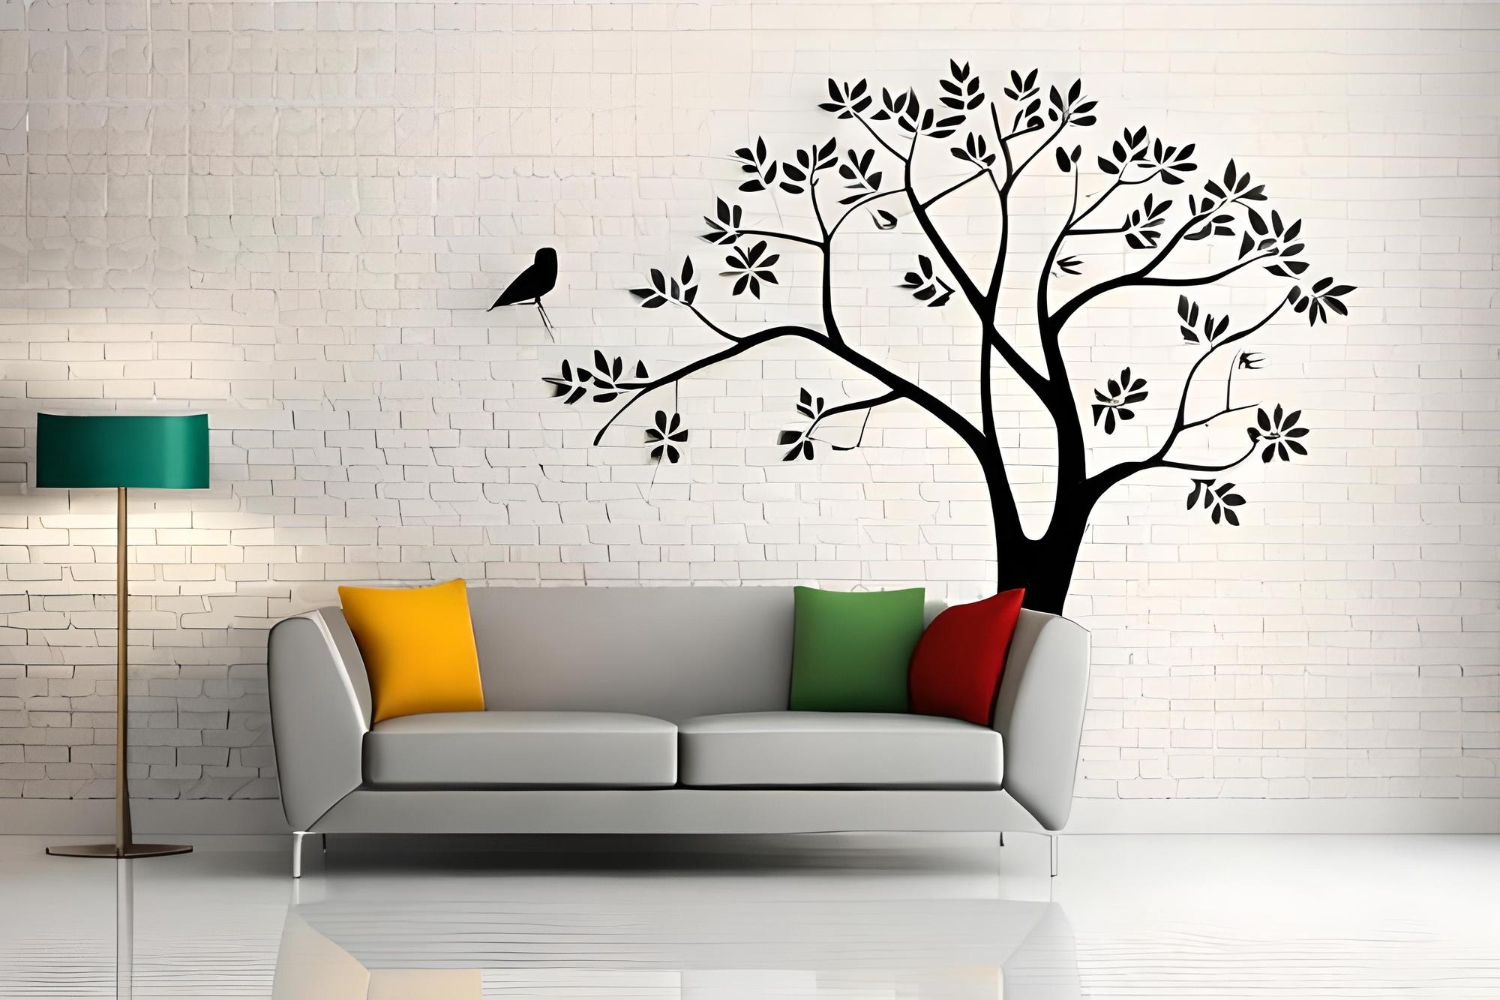 Give Your Wall a Mesmerizing Transformation with a Sticker